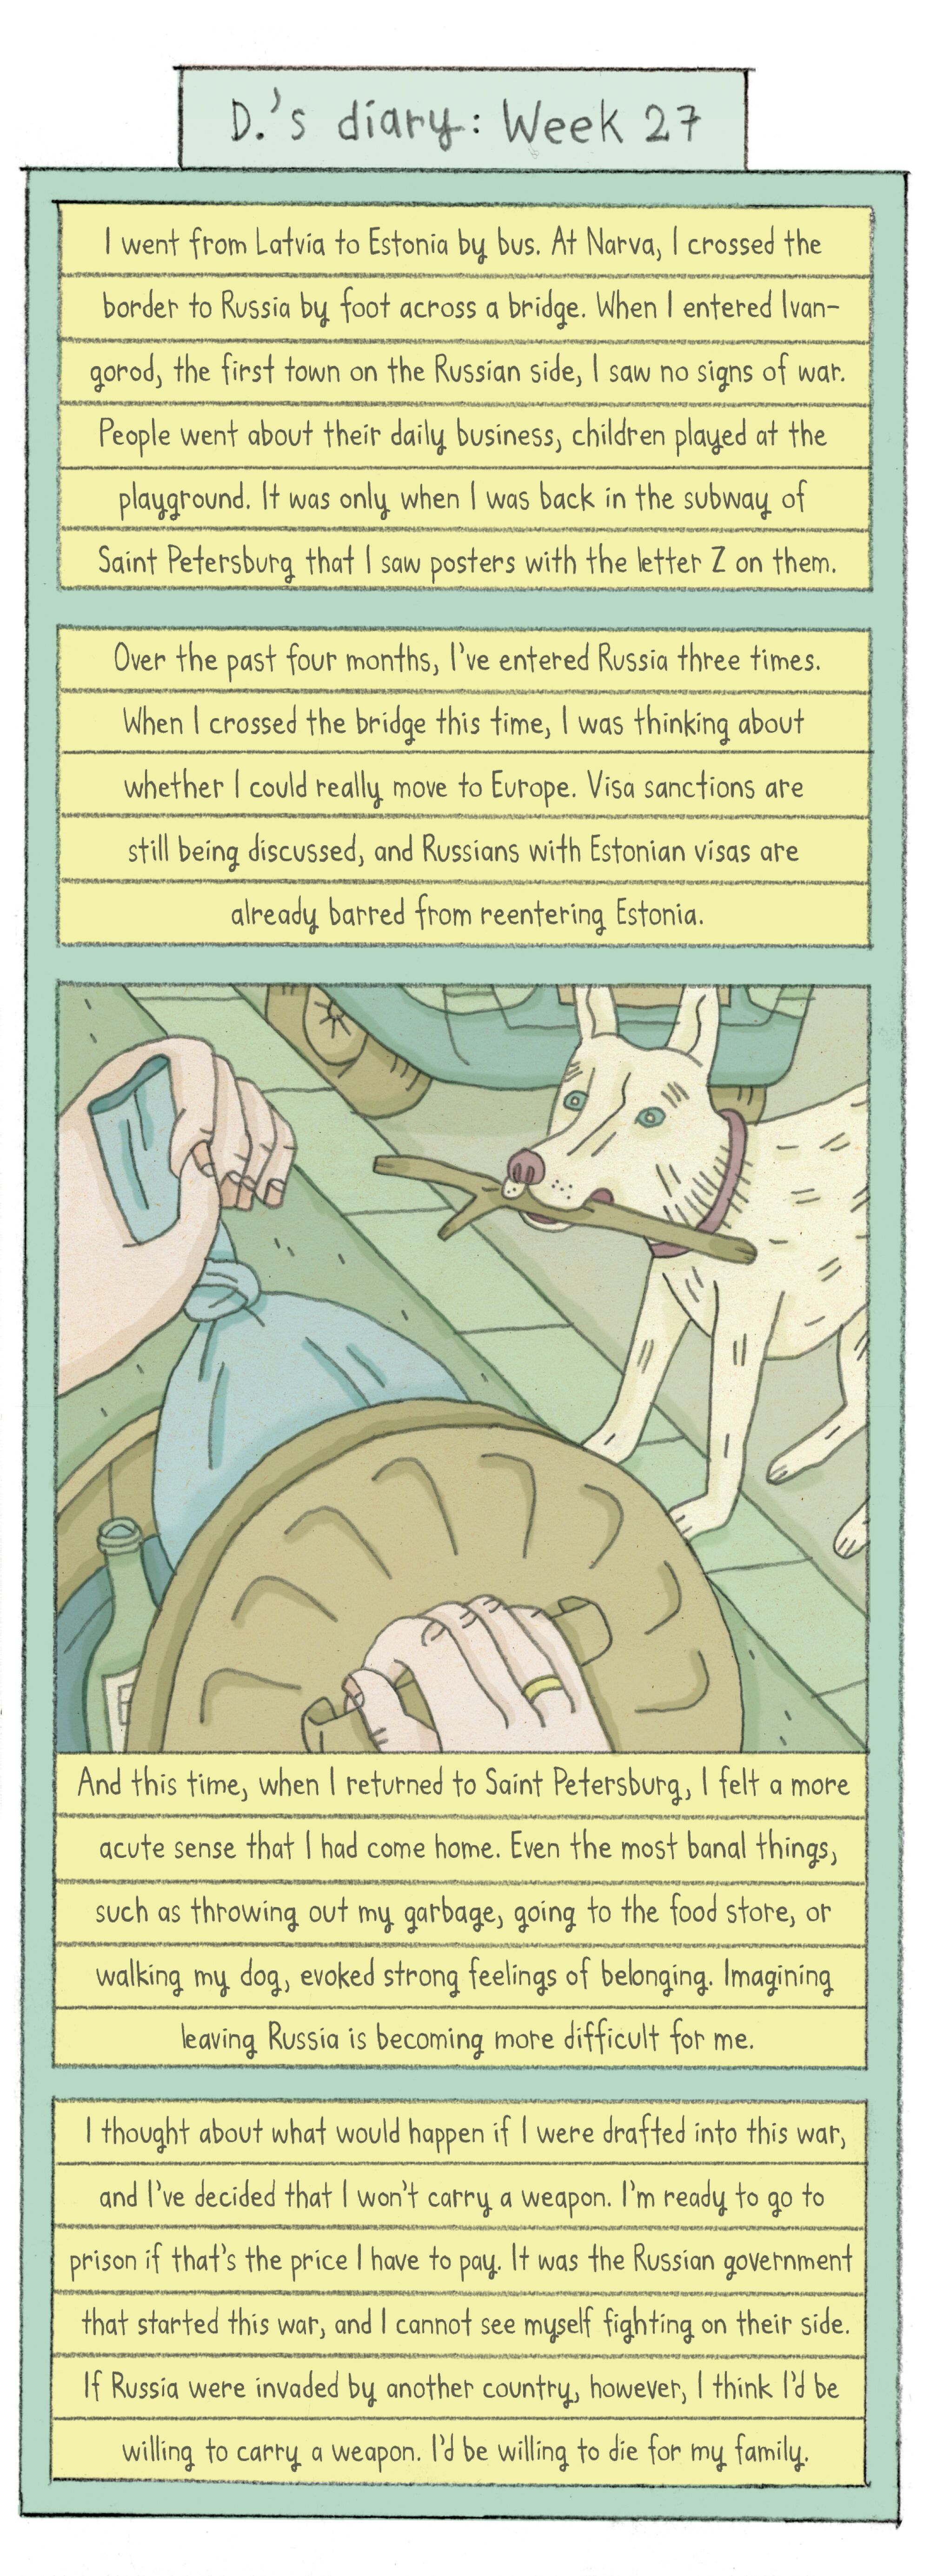 illustrated comic depicting someone putting garbage into a pail, with a white dog holding a stick nearby.